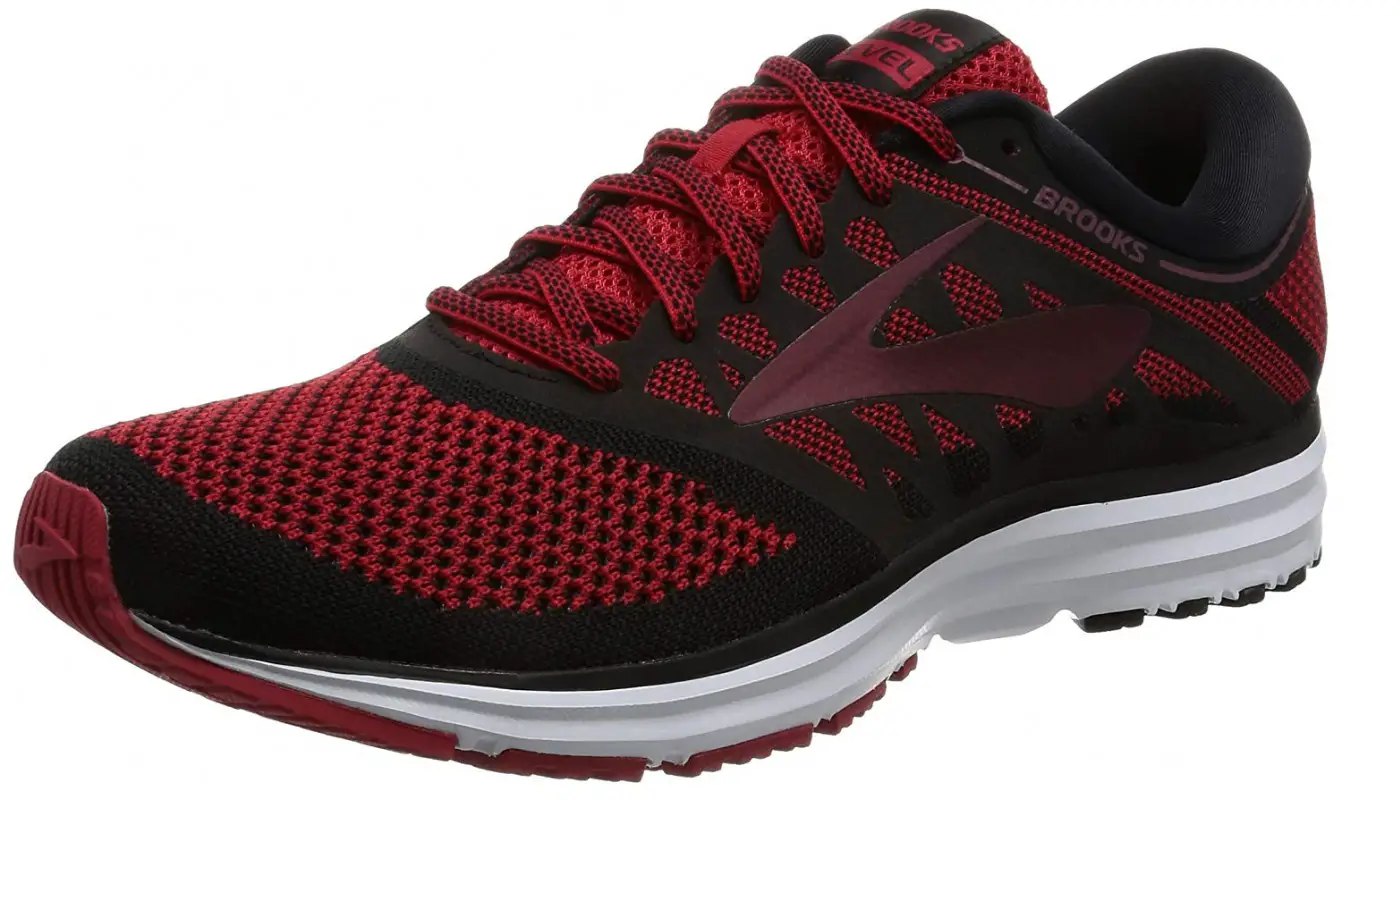 The Brooks Revel combines style and support in one shoe.